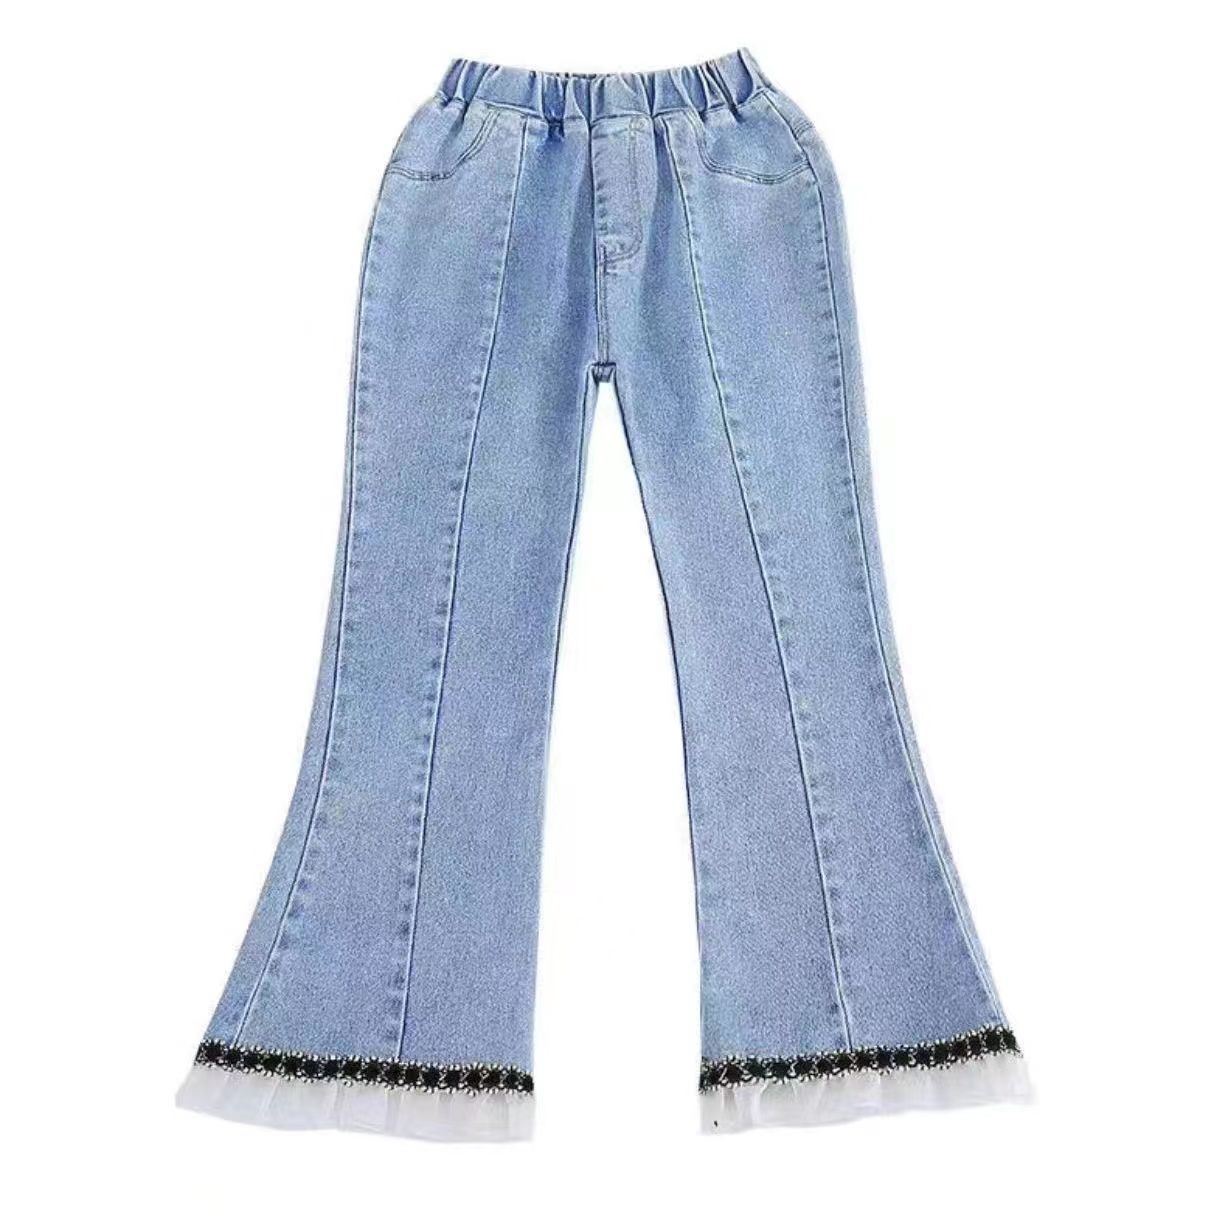 2023 Spring and Autumn New Girls' Western Style Fashionable Jeans Children's Slim Flared Pants Baby Elastic Outerwear Pants